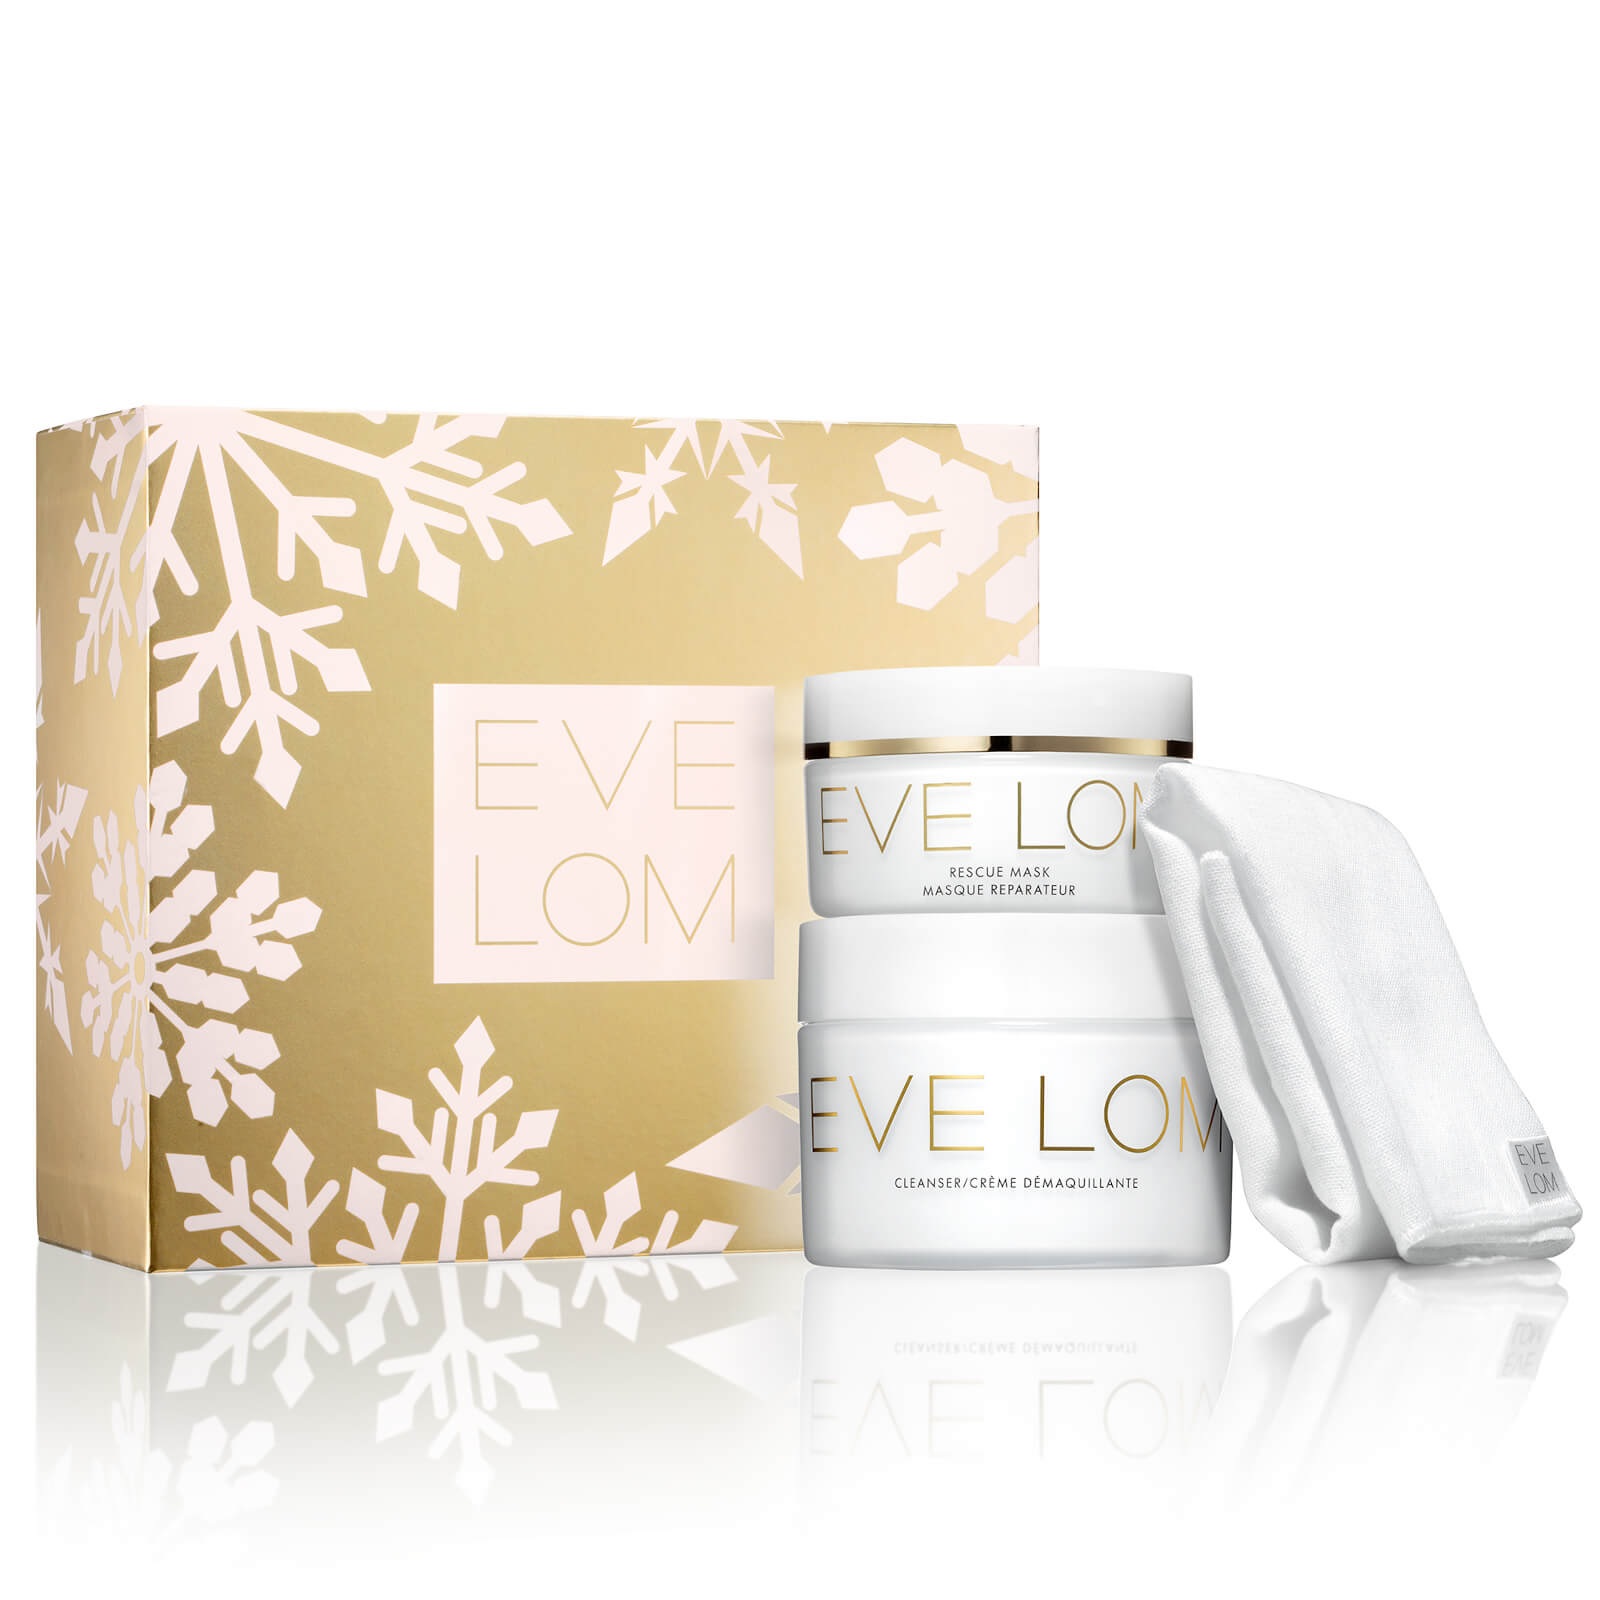 BEAUTY EXPERT UK: EVE LOM Exclusive Deluxe Resue Ritual Gift Set (Worth £155.00)